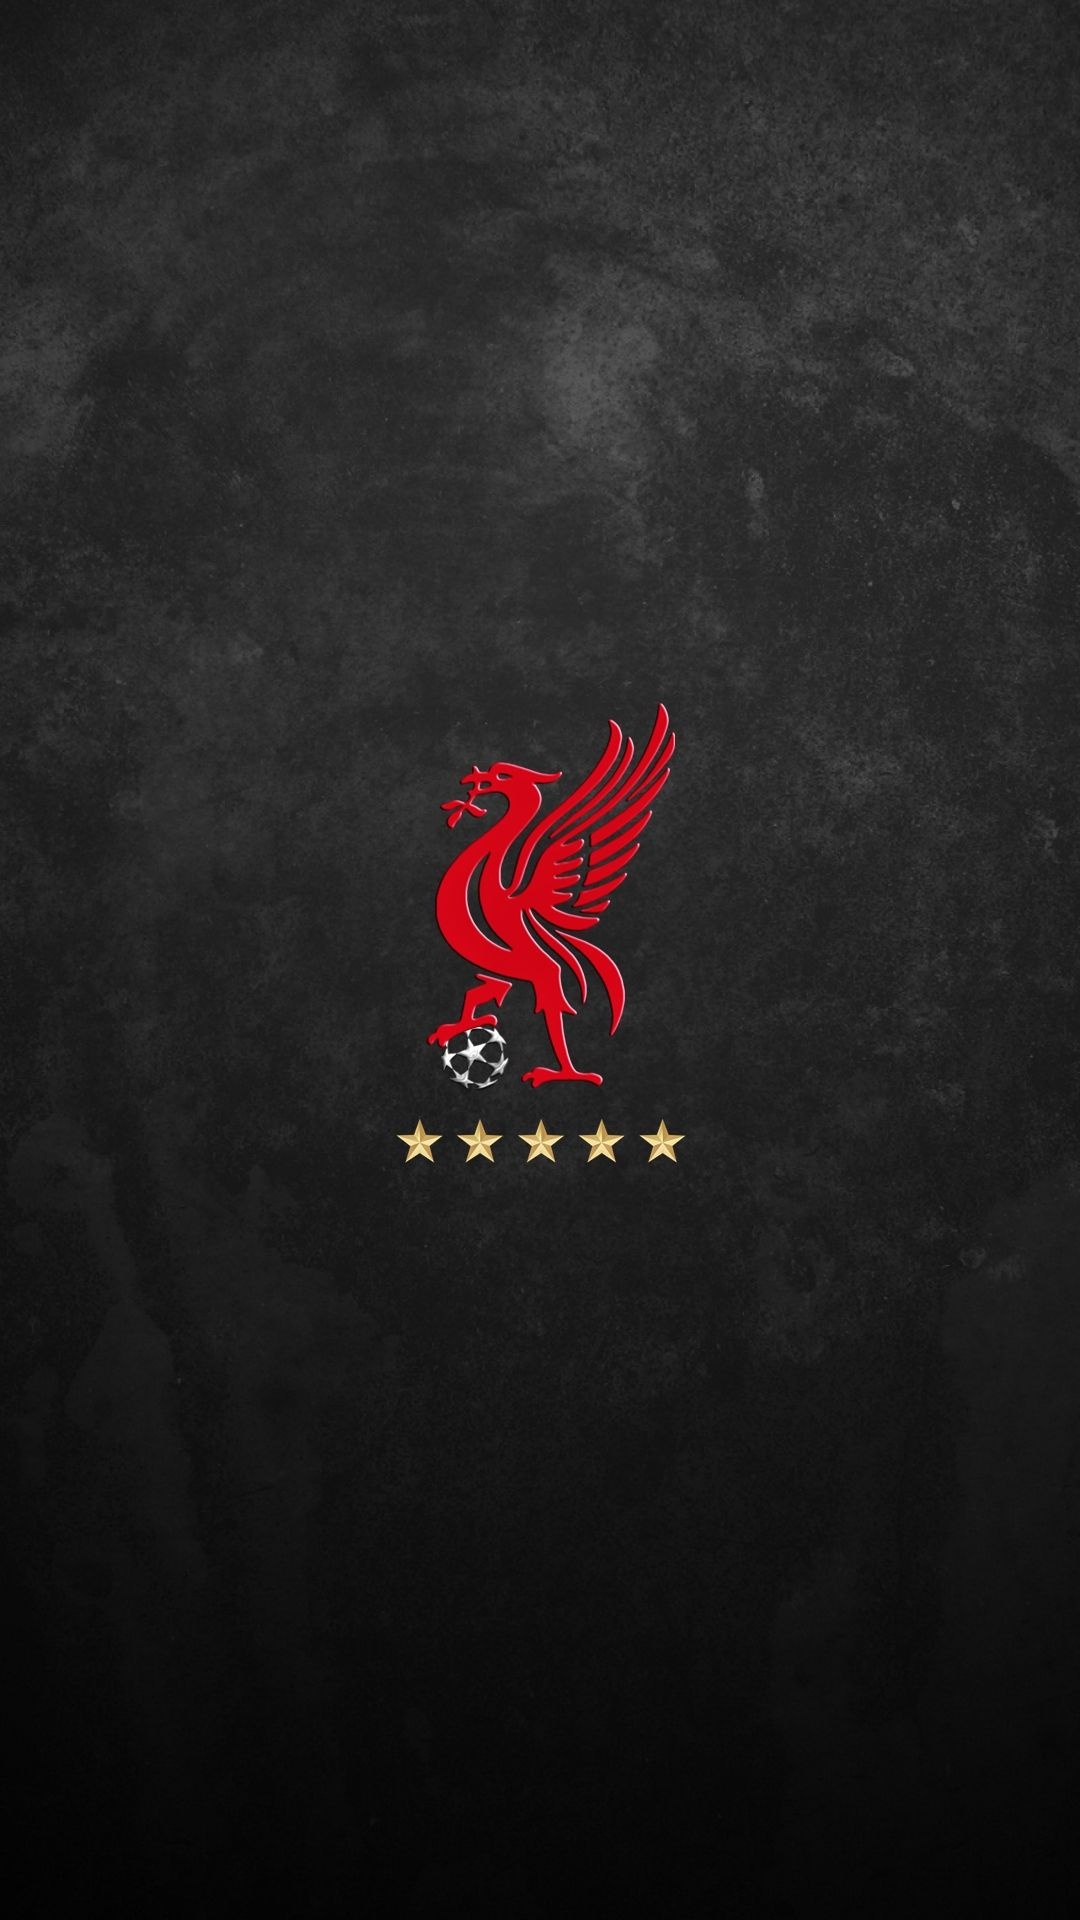 Liverpool Football Club: Anfield Stadium, The home of one of the world's most famous and successful football teams. 1080x1920 Full HD Wallpaper.